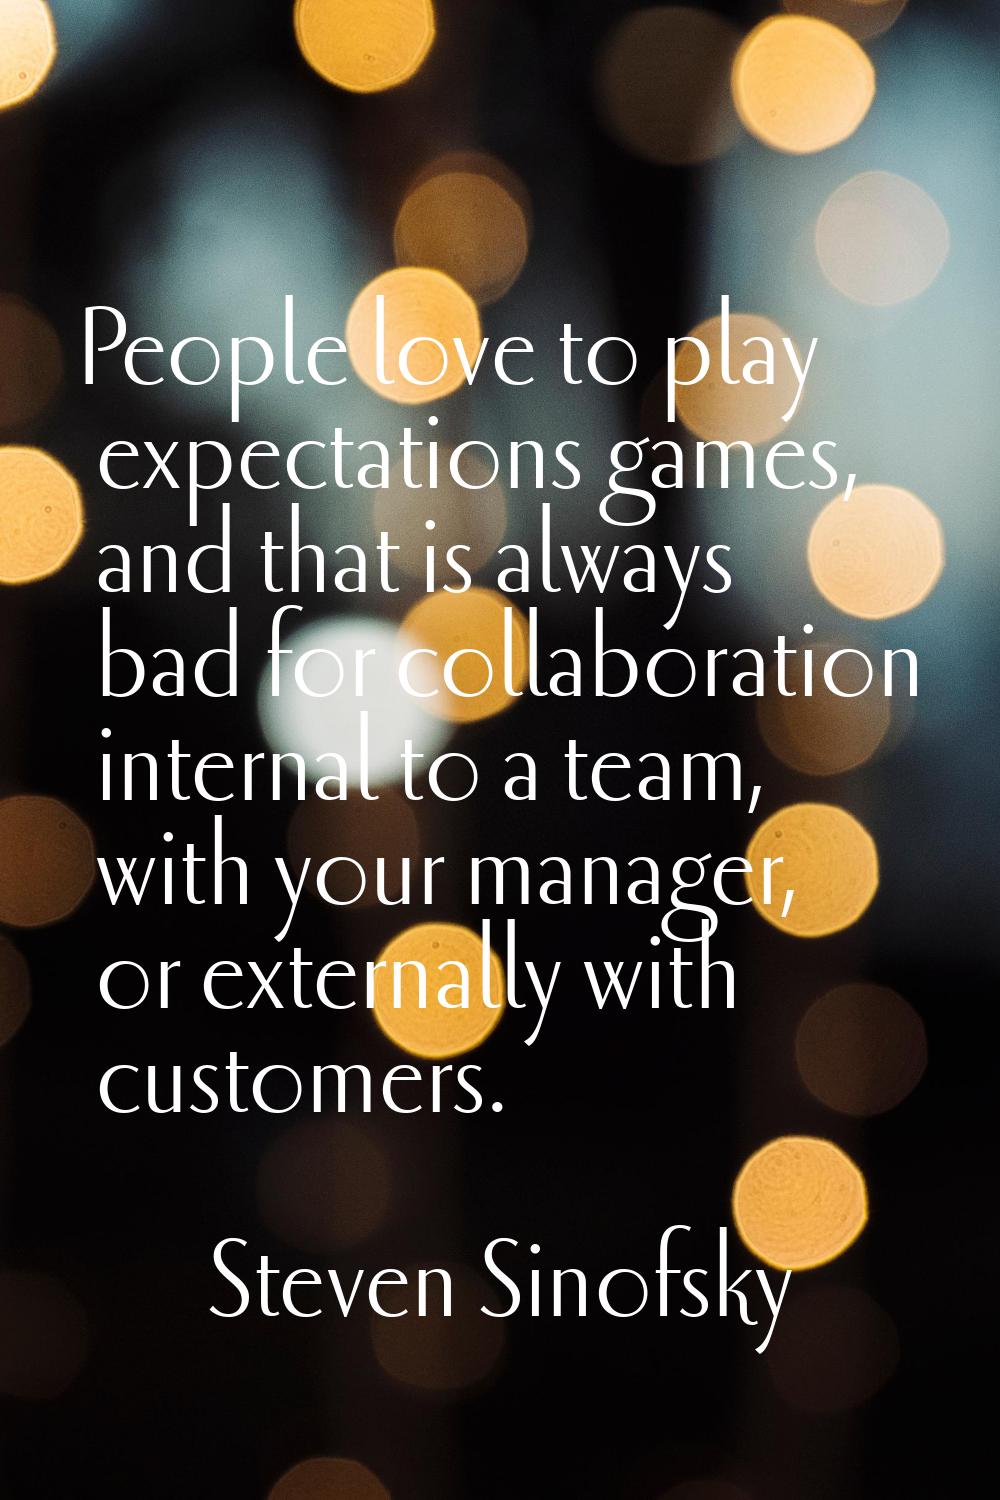 People love to play expectations games, and that is always bad for collaboration internal to a team